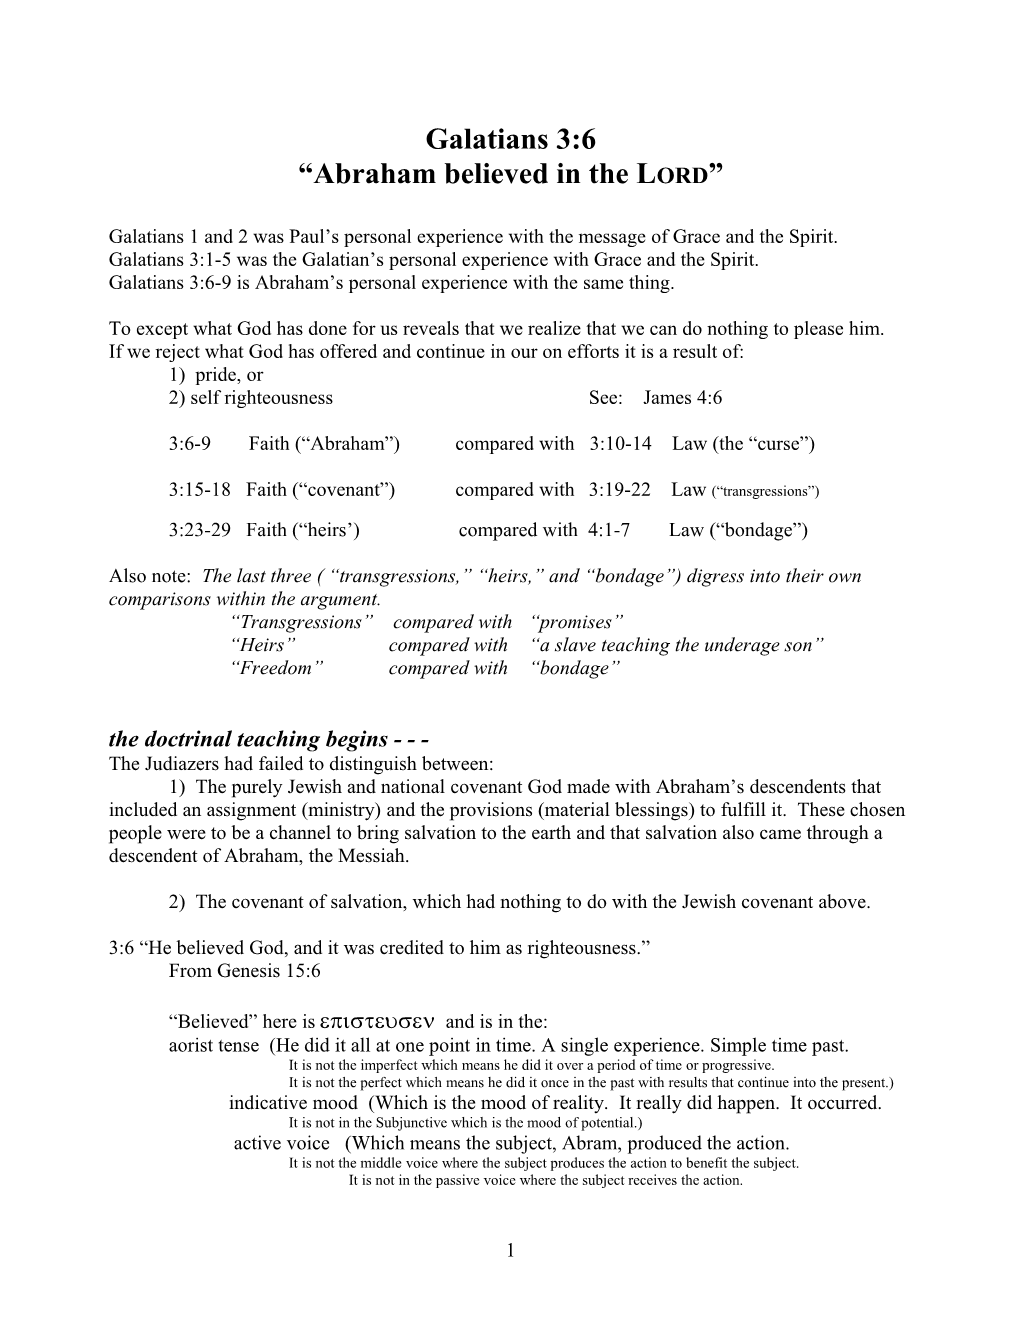 Abraham Believed in the LORD